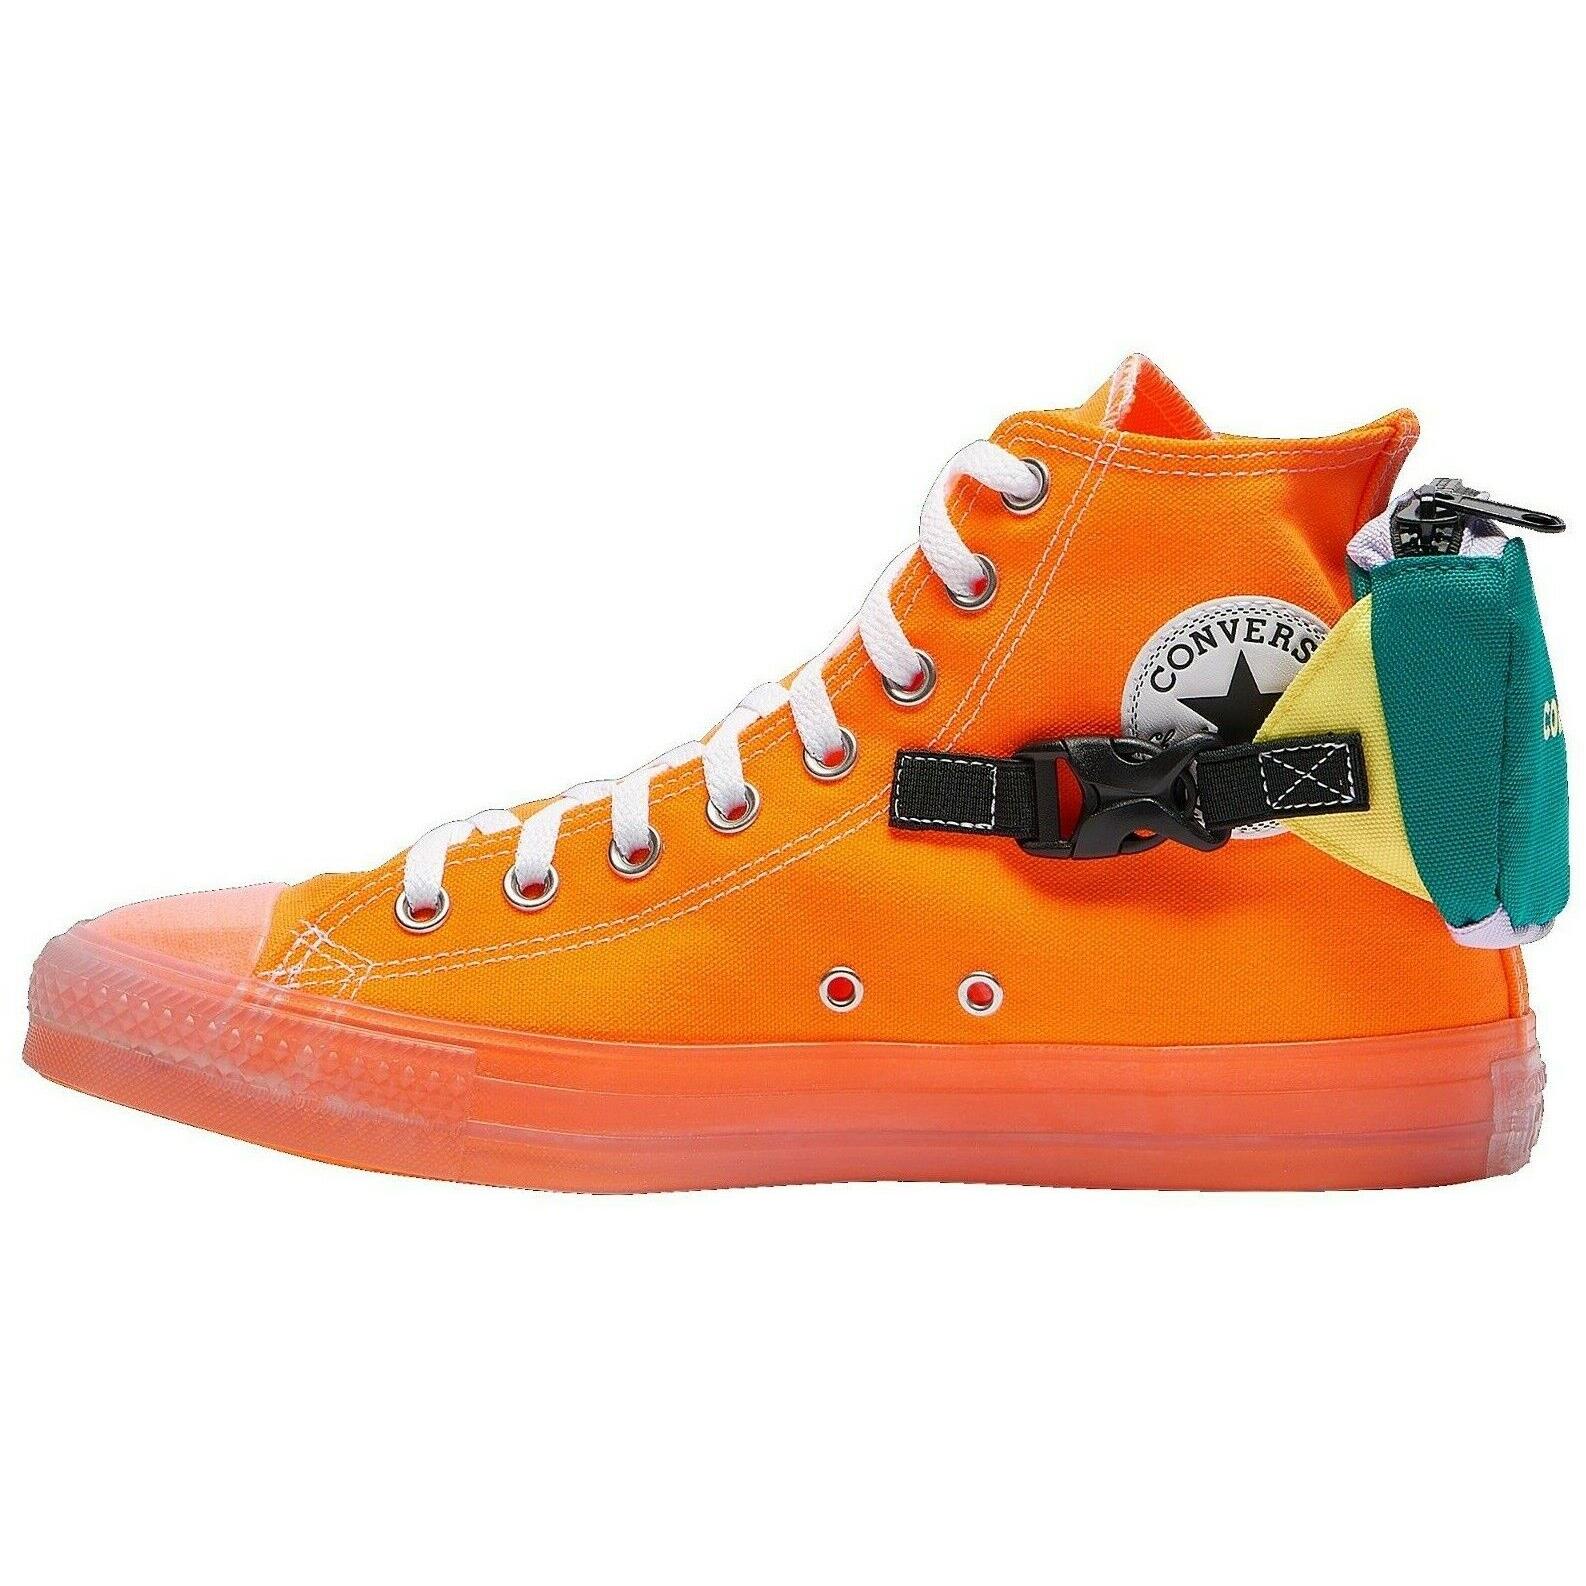 Converse Chuck Taylor All Star Buckle Up Hi Shoes 169031C Multi Sizes Orange/ma